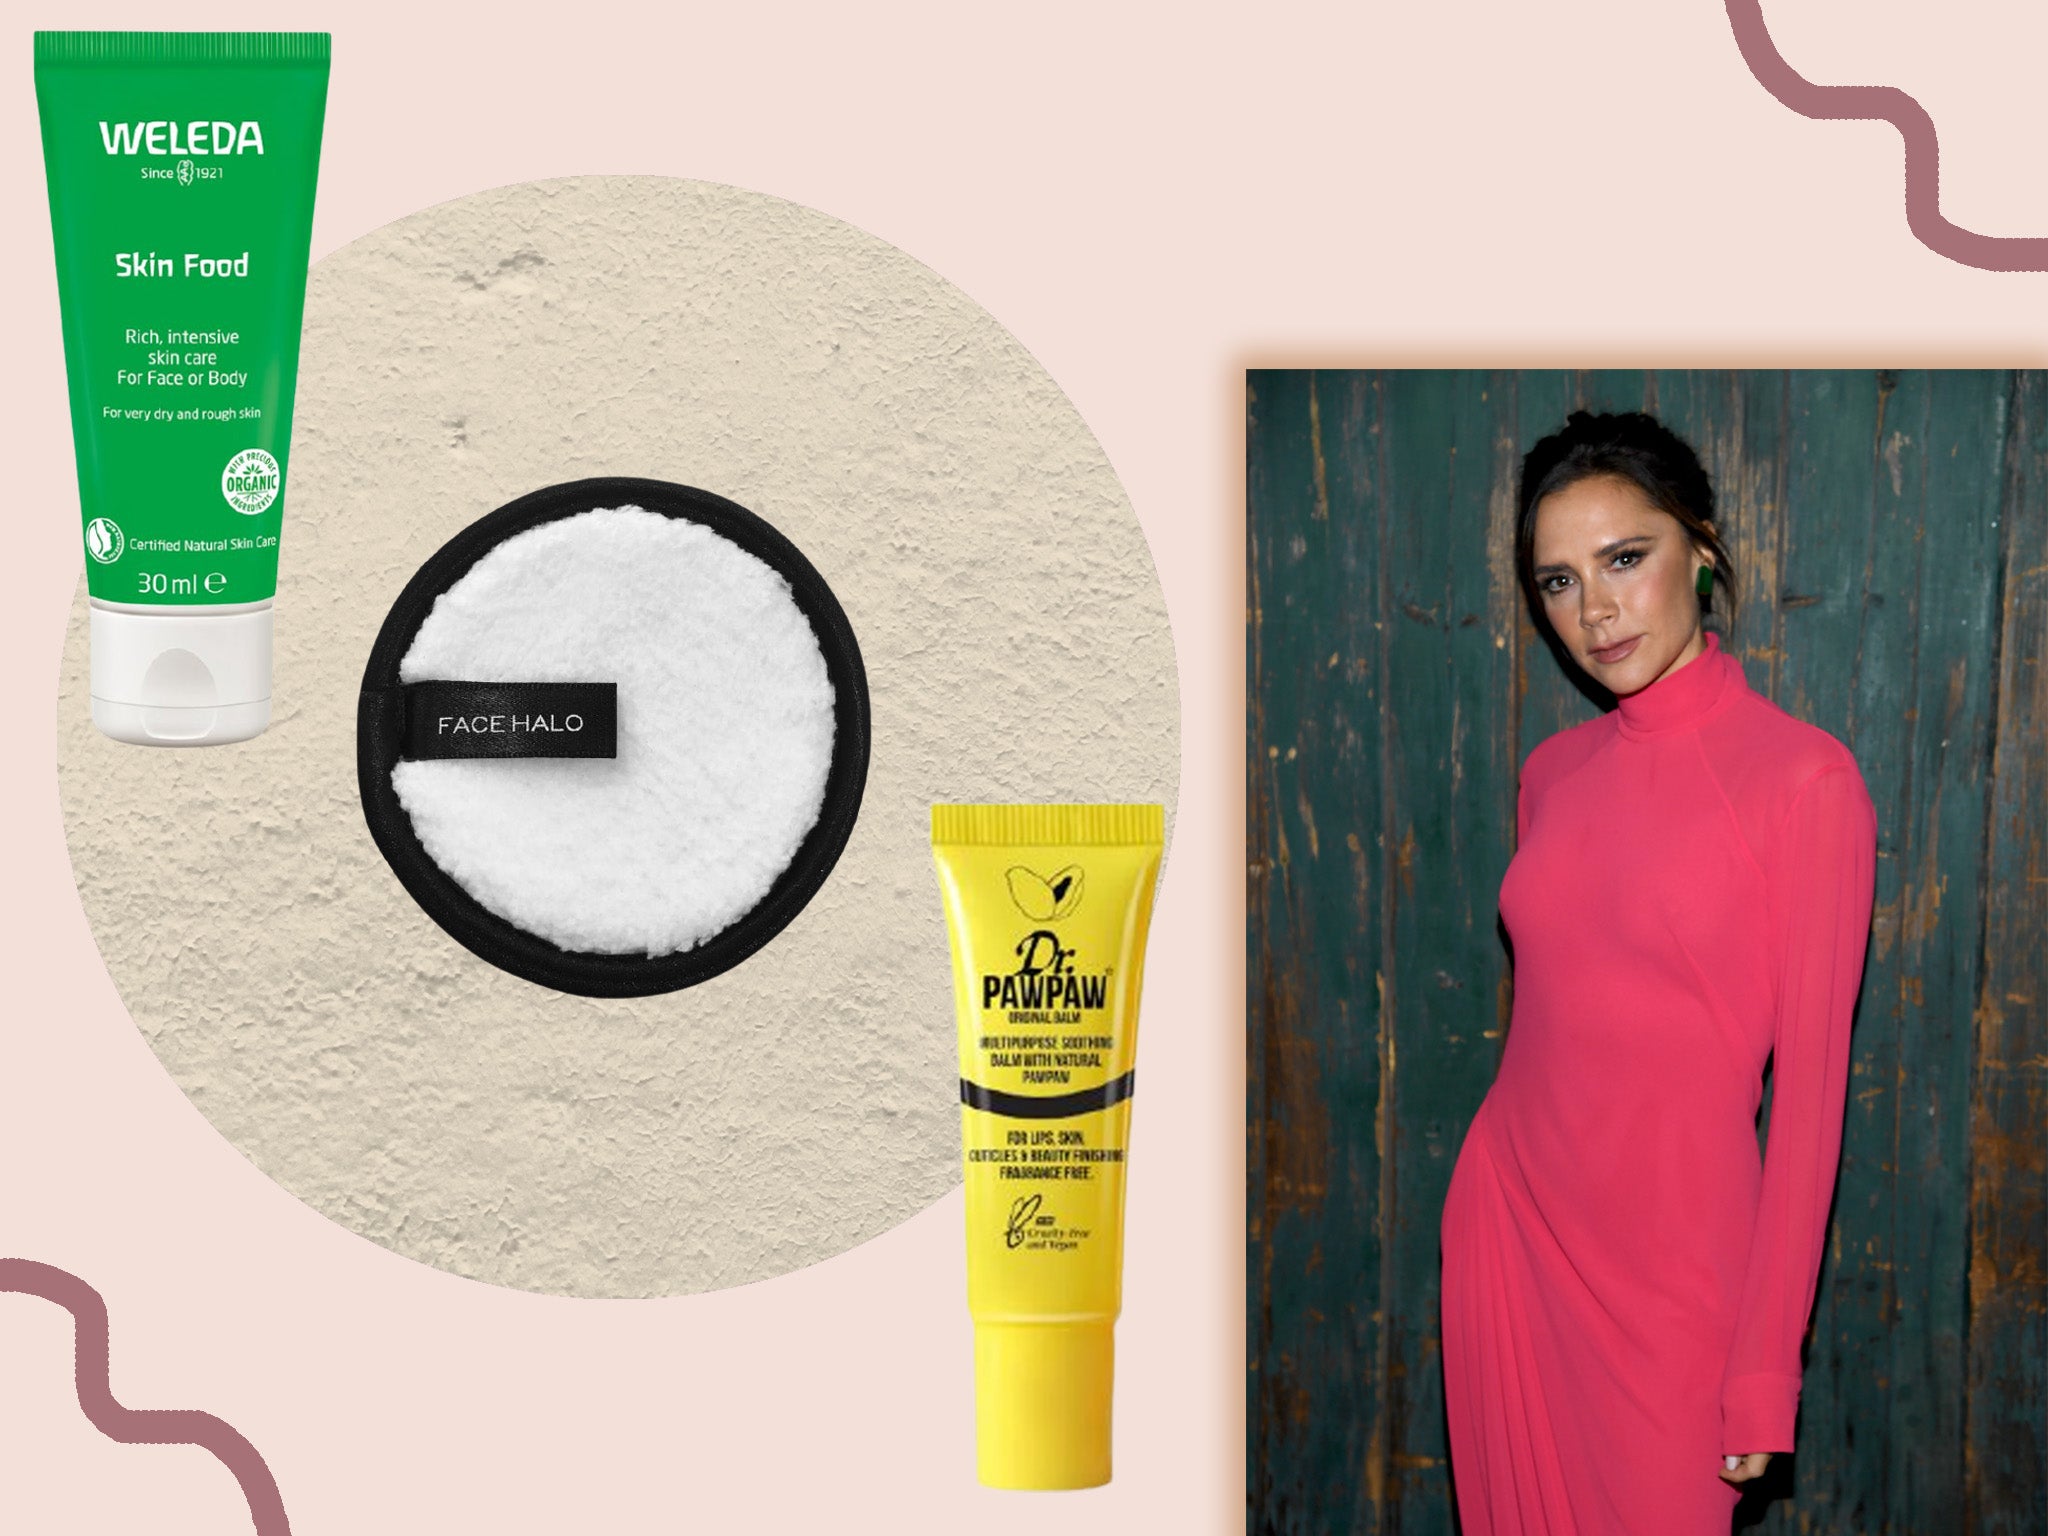 Whether it’s an eco-friendly Face Halo make-up remover pad or a new lip balm, these are the A-list recommended products to know